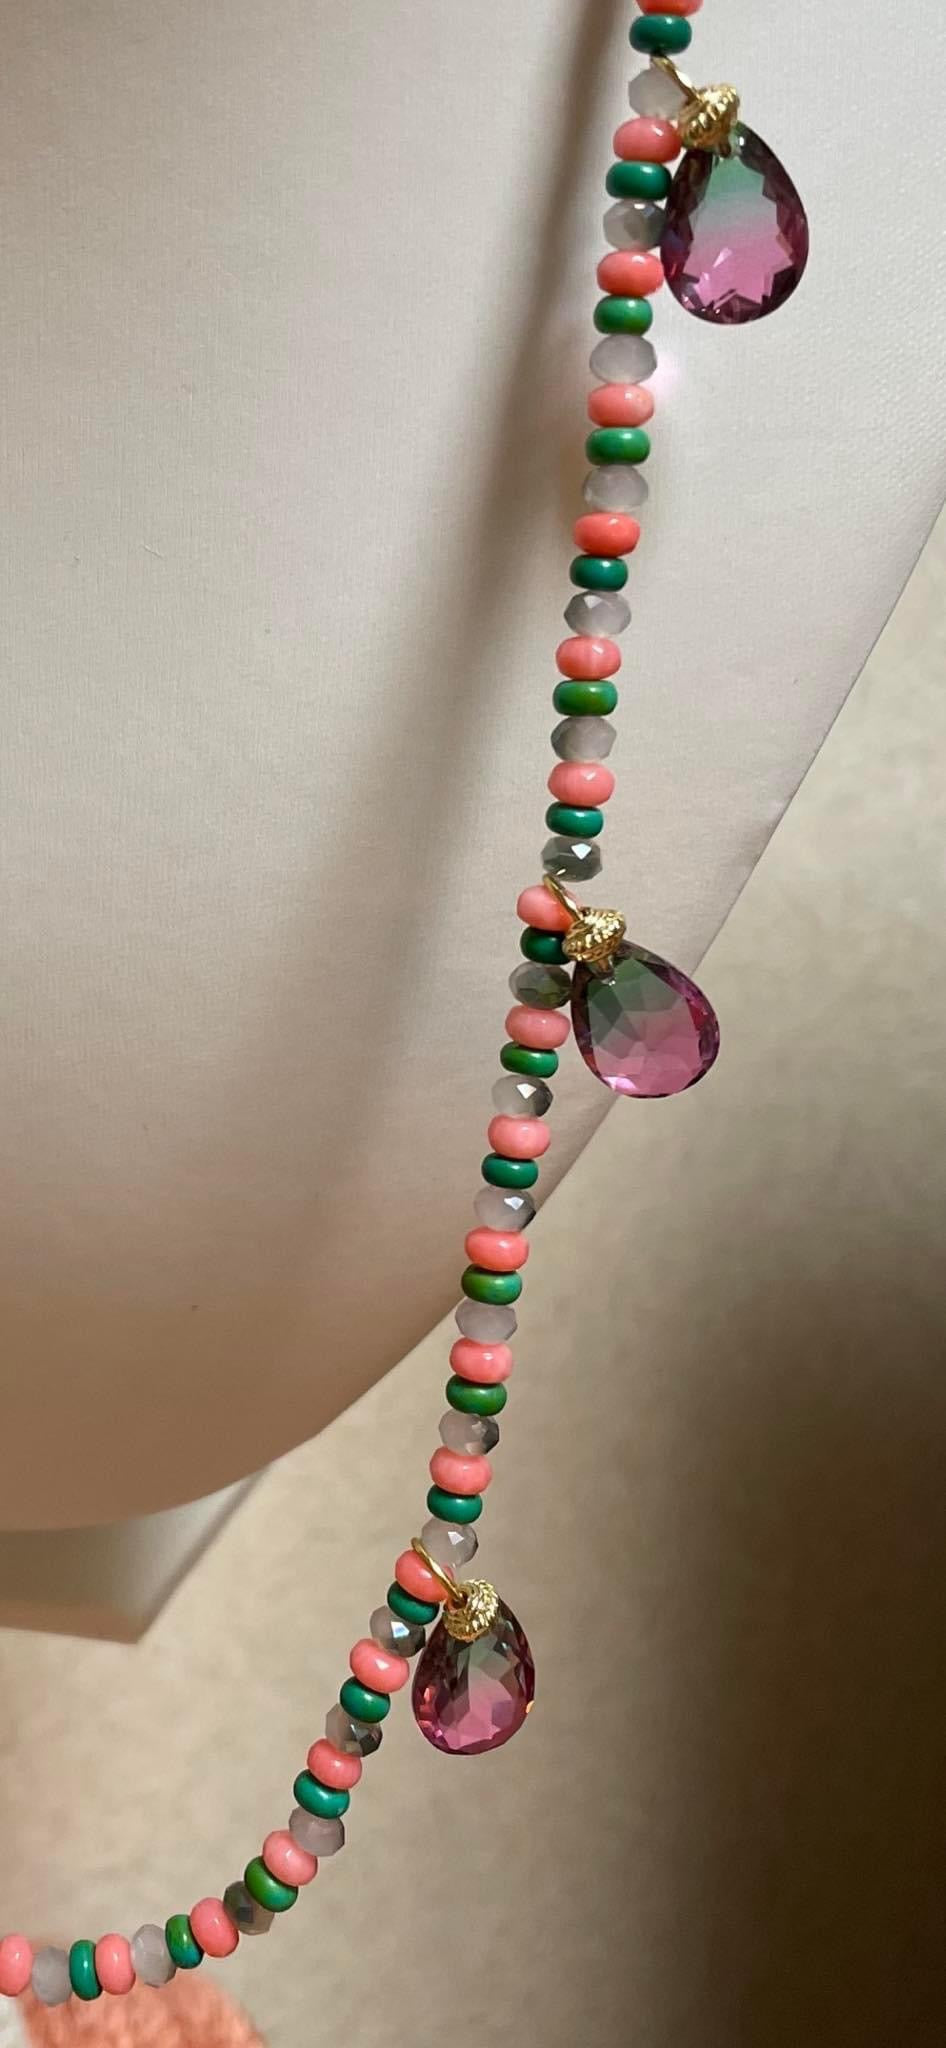 4 colored beads necklace